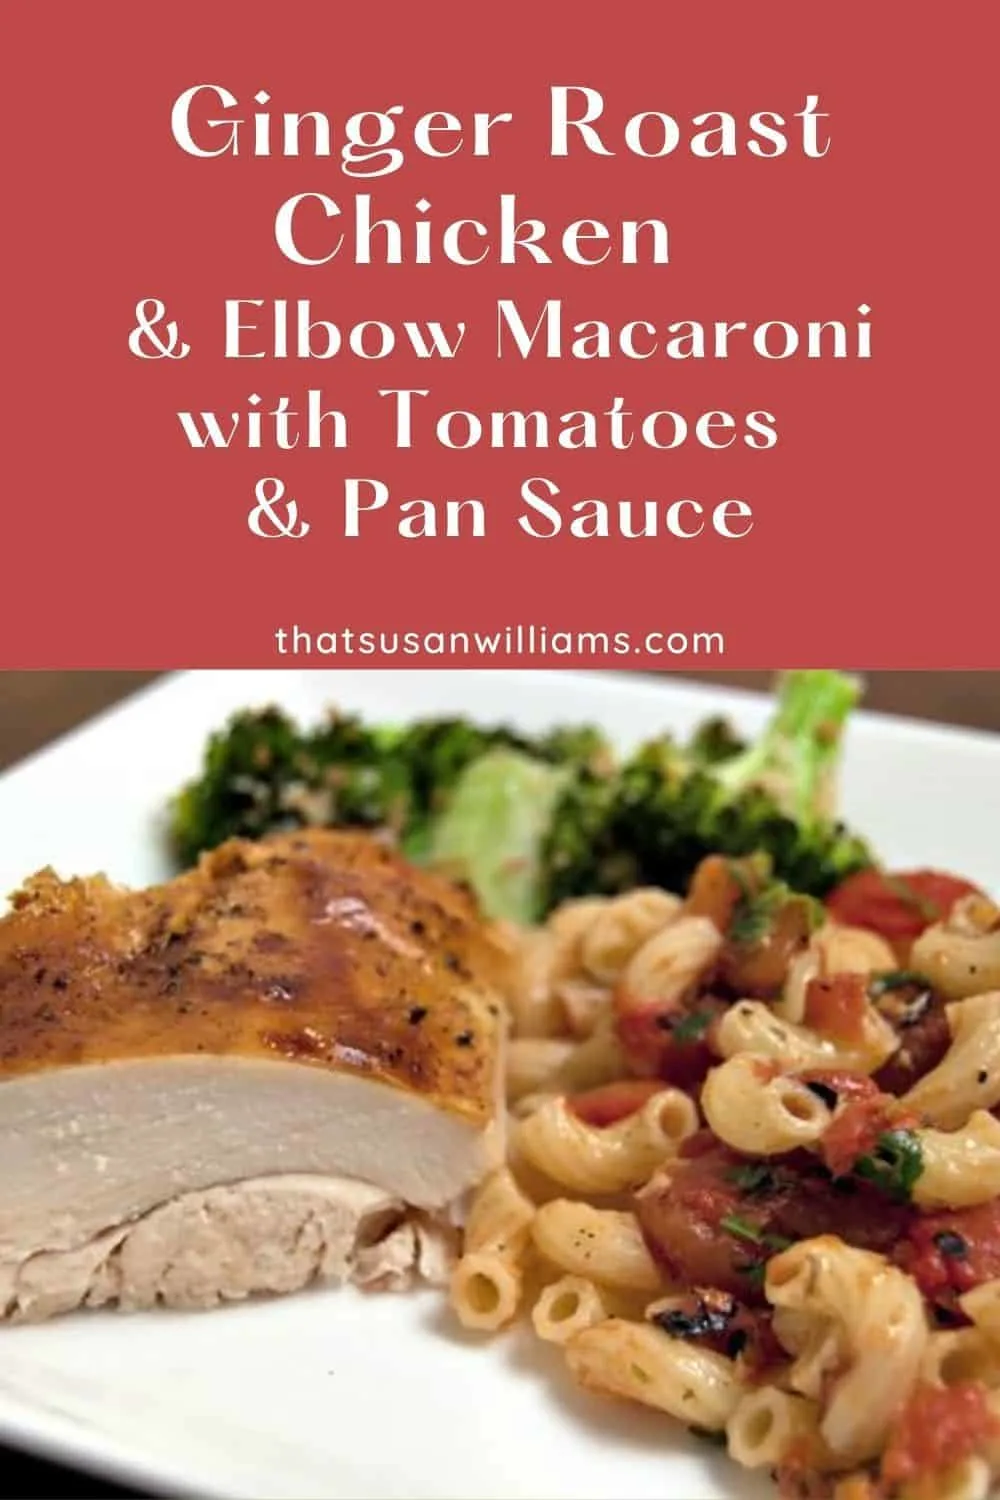 Ginger Roast Chicken and Elbow Macaroni with Tomatoes and Pan Sauce